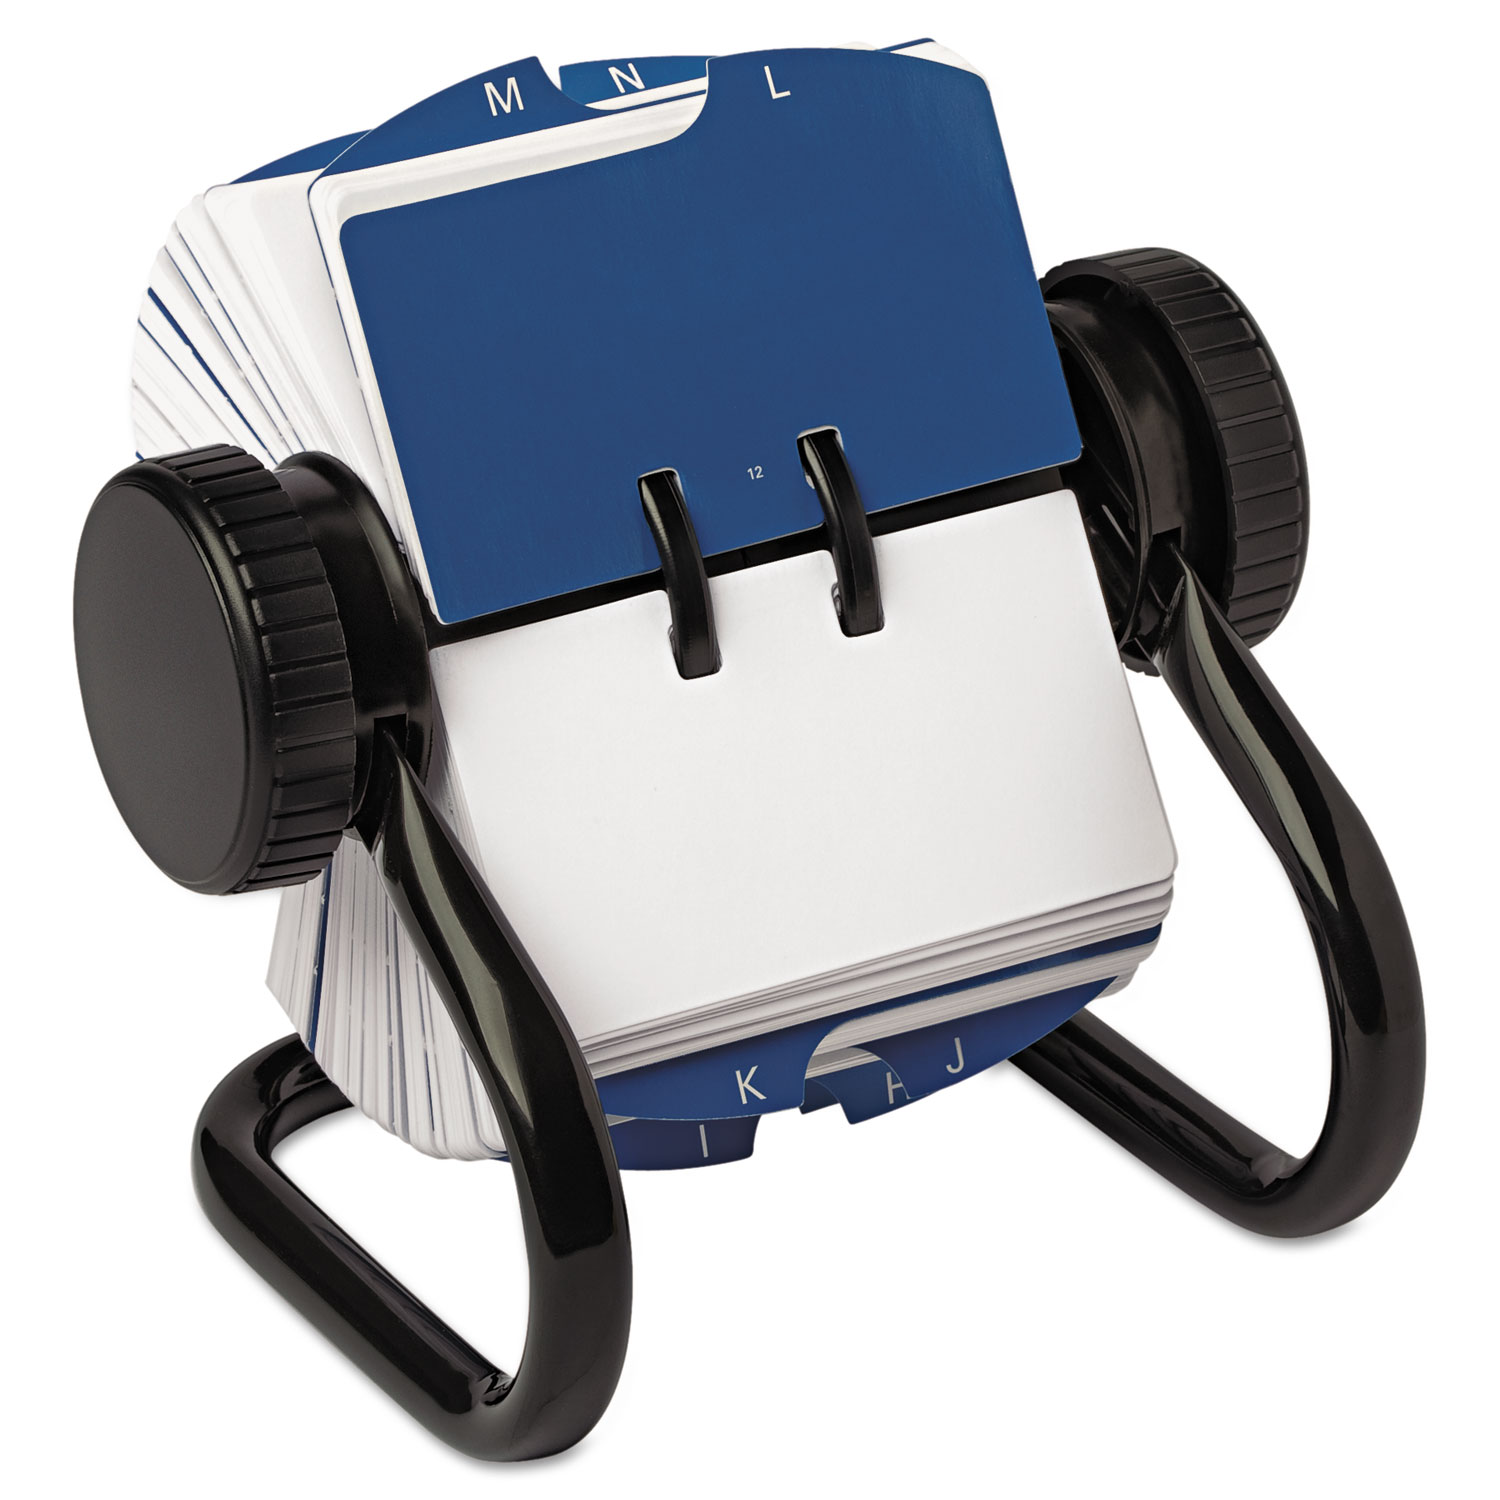  Rolodex 66700 Open Rotary Card File Holds 250 1 3/4 x 3 1/4 Cards, Black (ROL66700) 